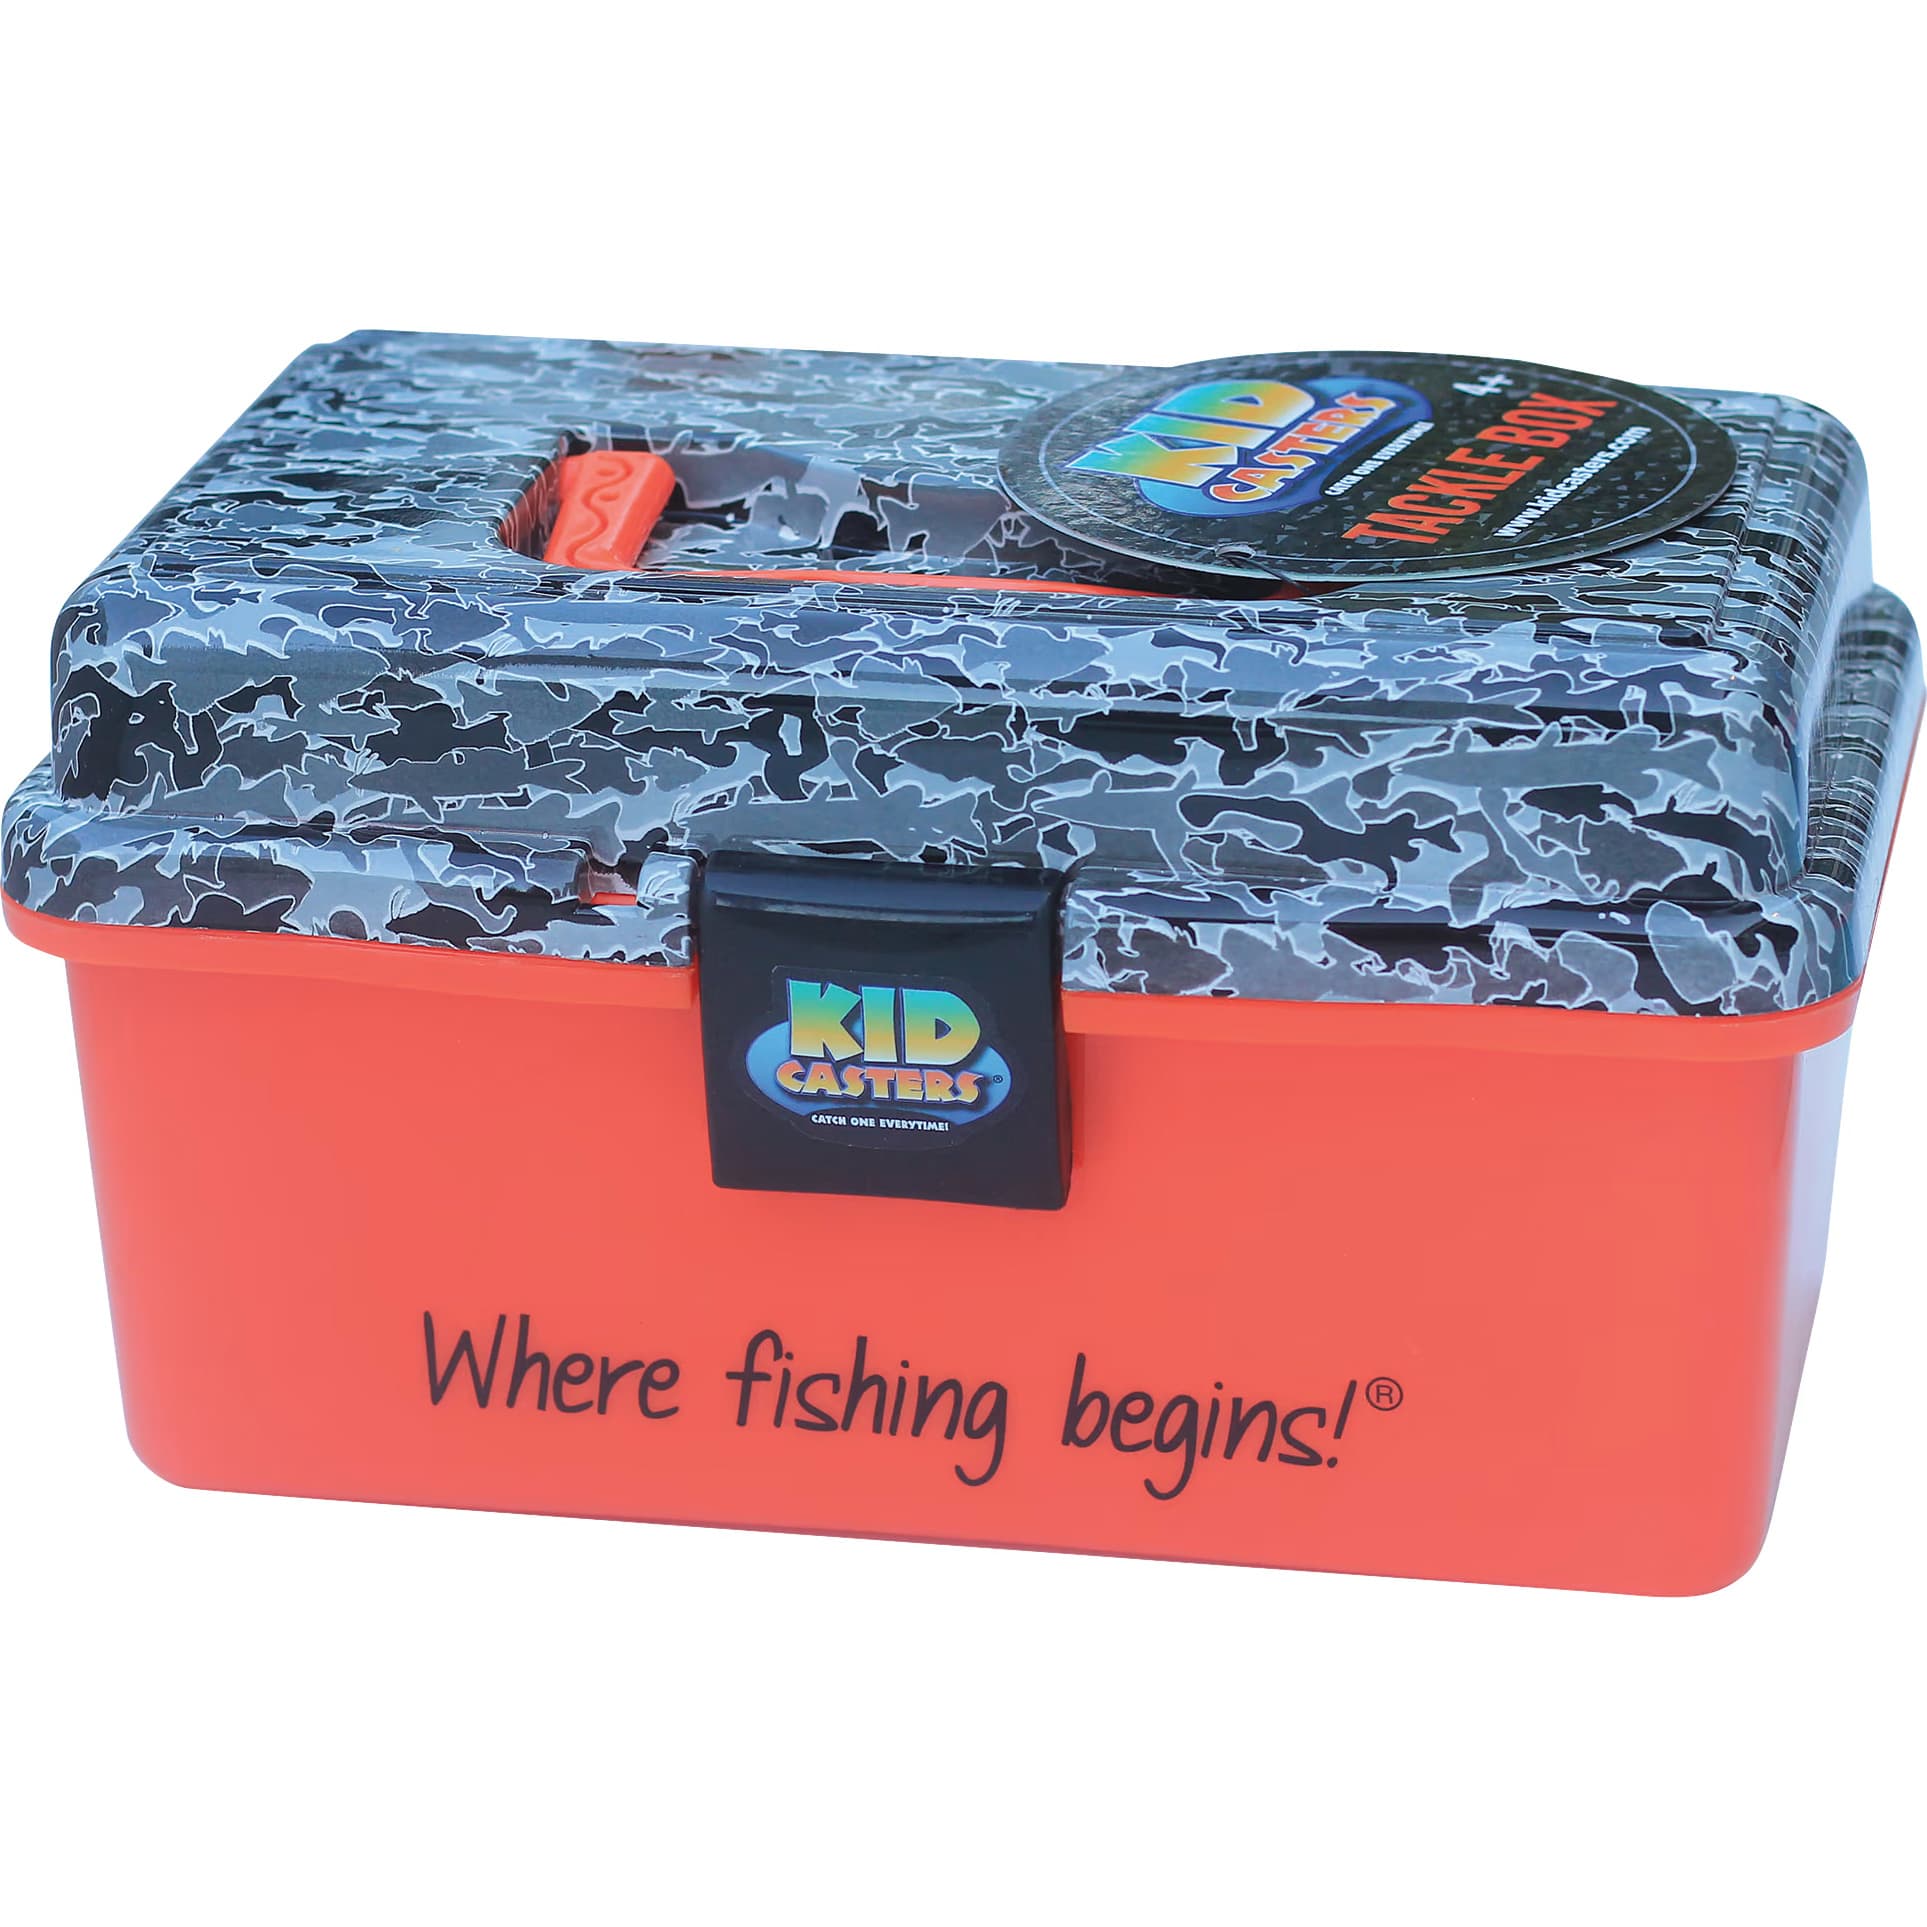 Kid Casters Tackle Box - Cabelas - KID CASTERS - Tackle Boxes